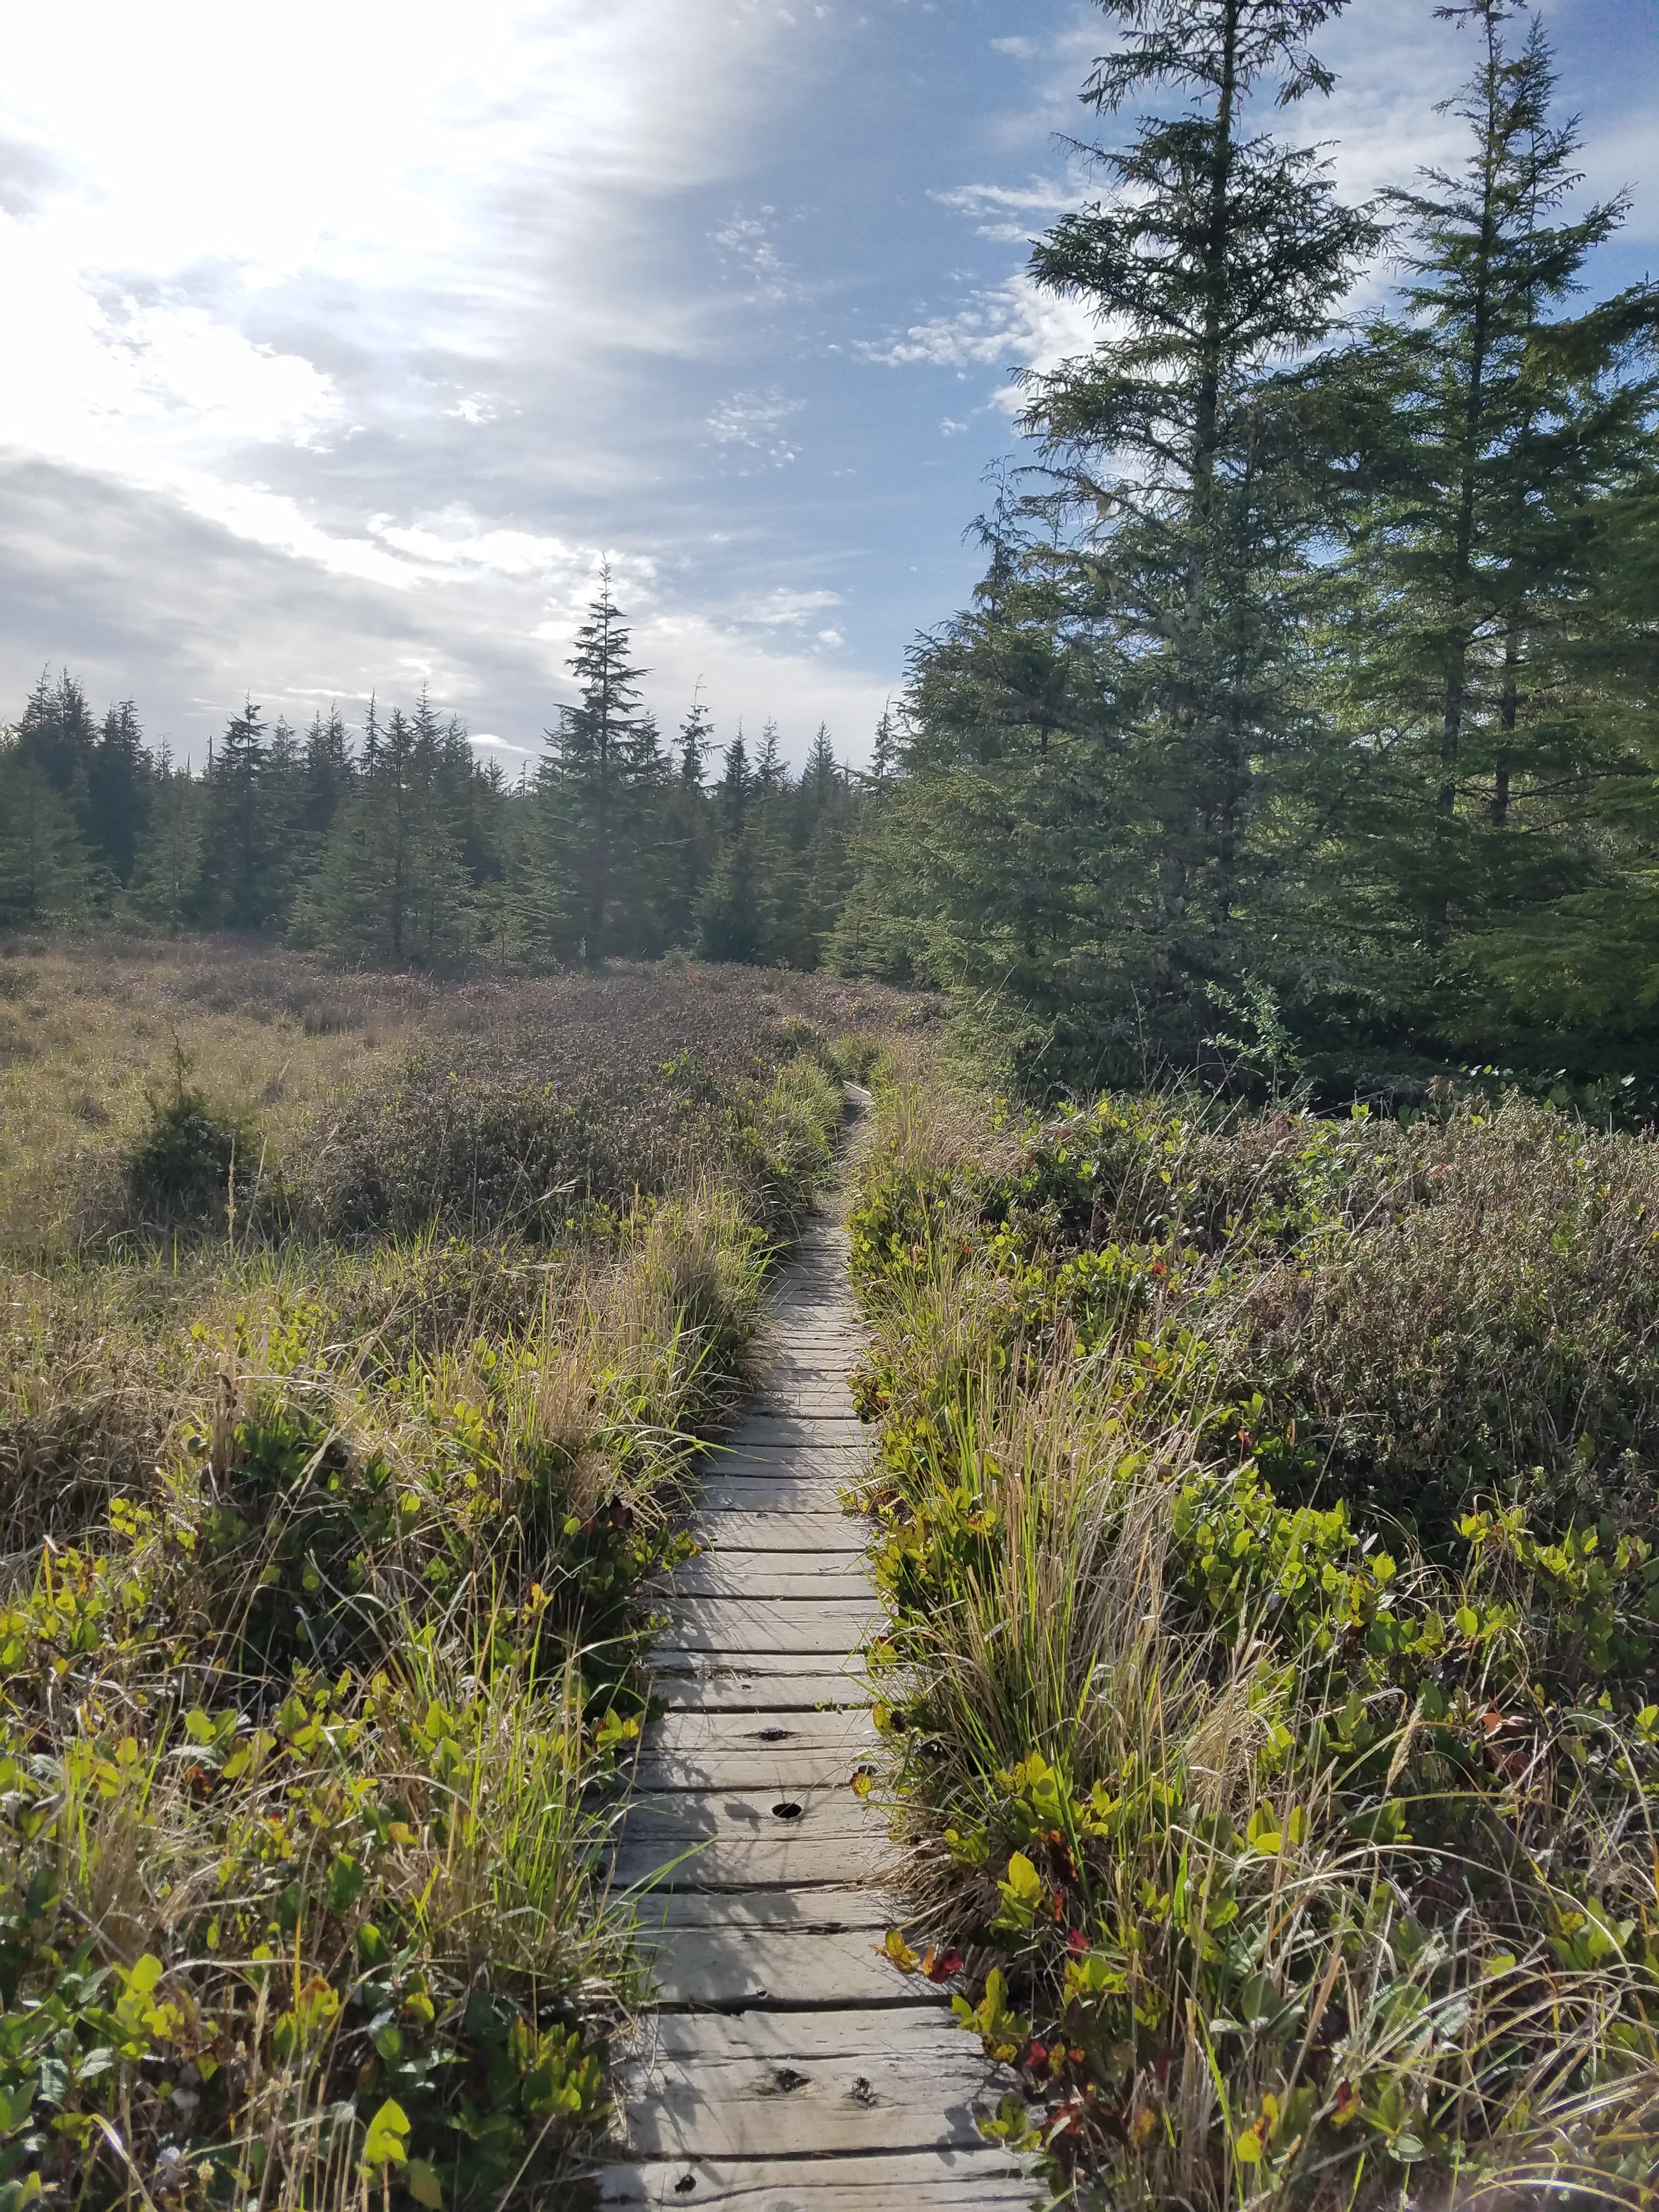 A three mile boardwalk takes us from Ozette Lake to Cape Alava and the coast.